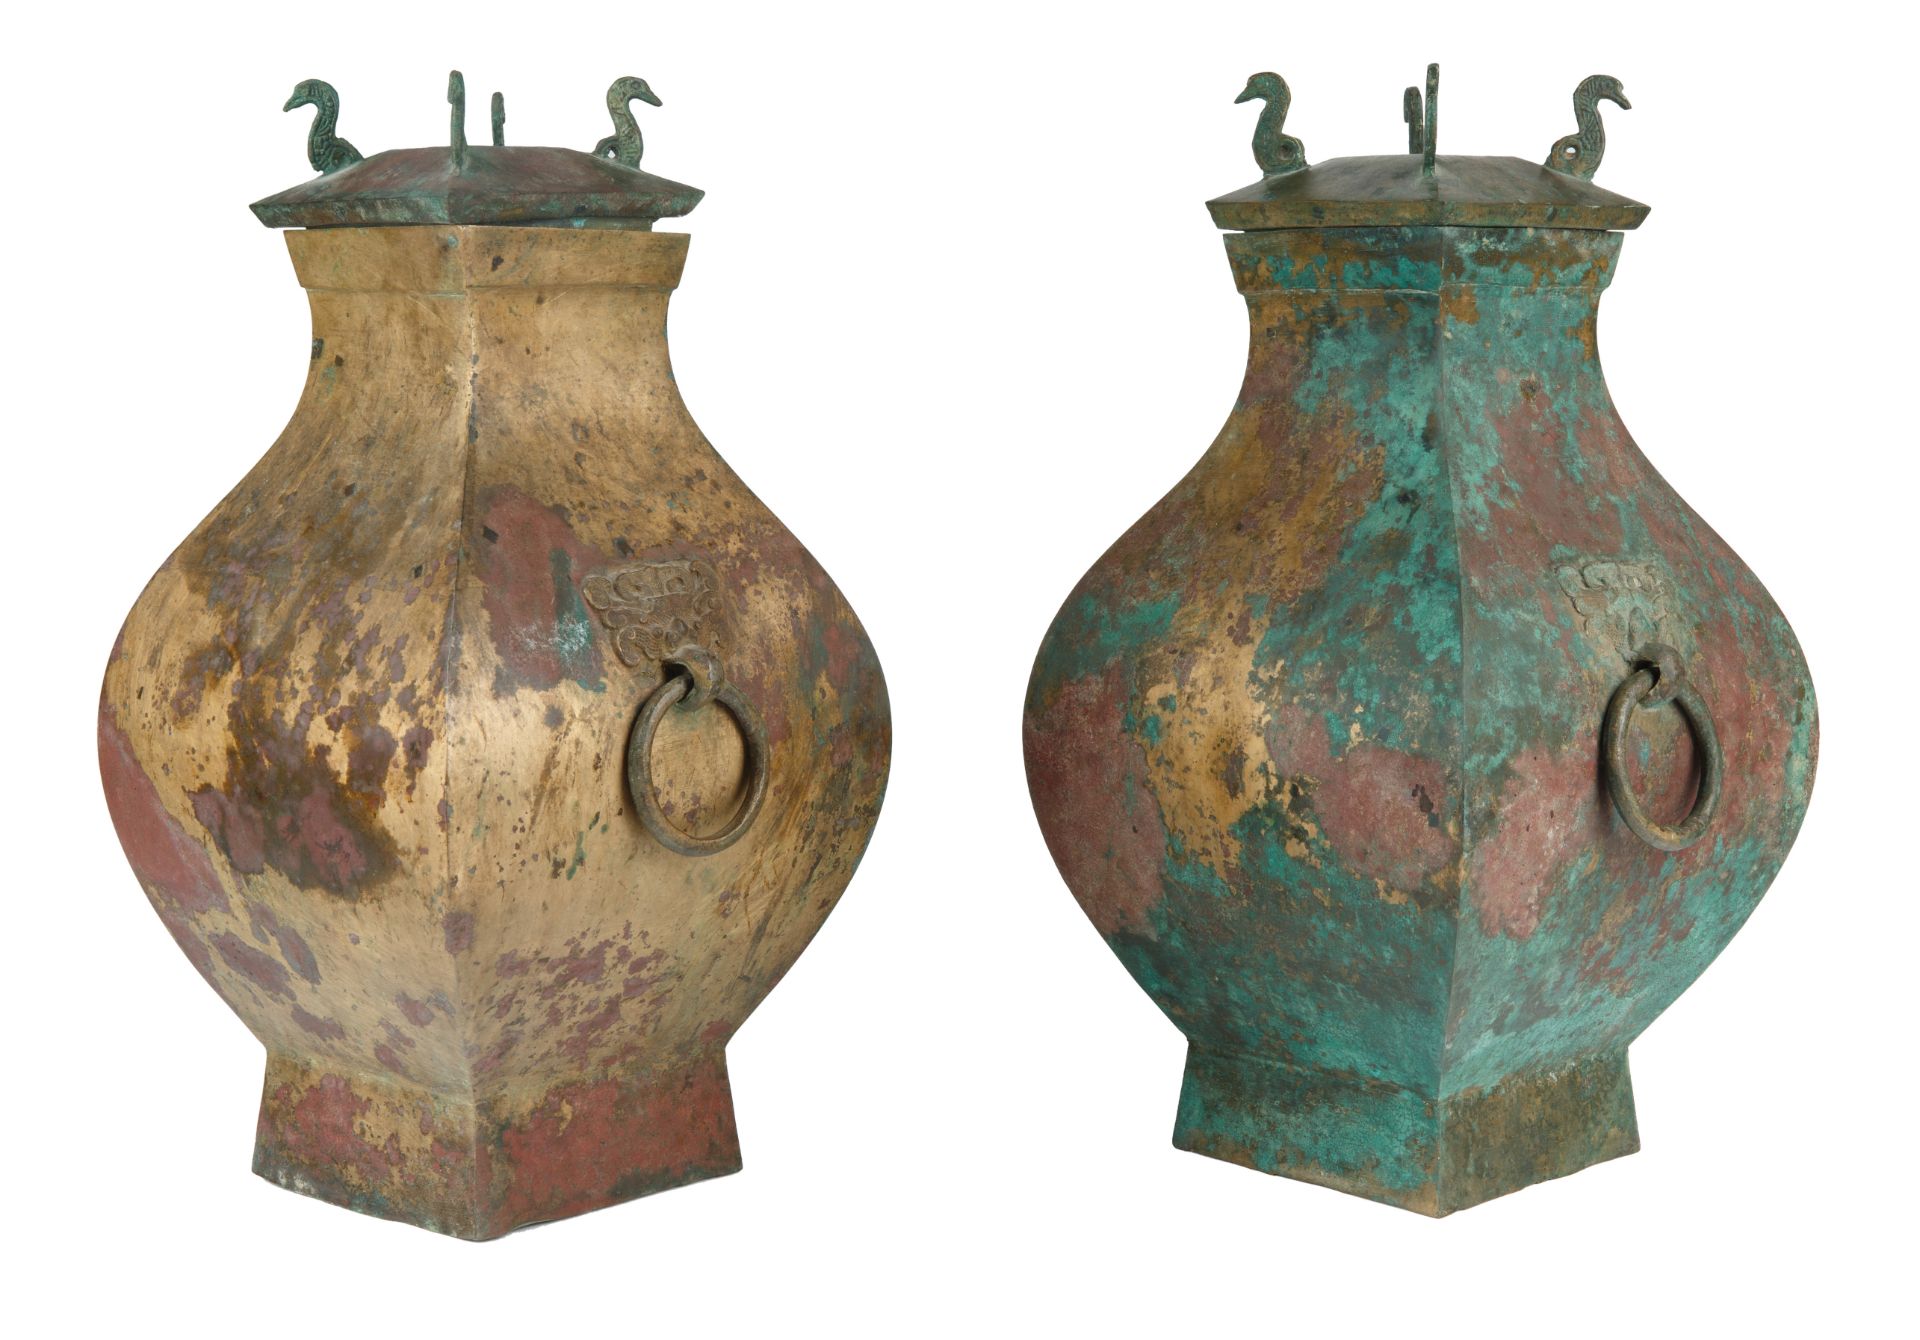 HAN DYNASTY FANGHU BRONZE RITUAL VESSELS AND COVERS